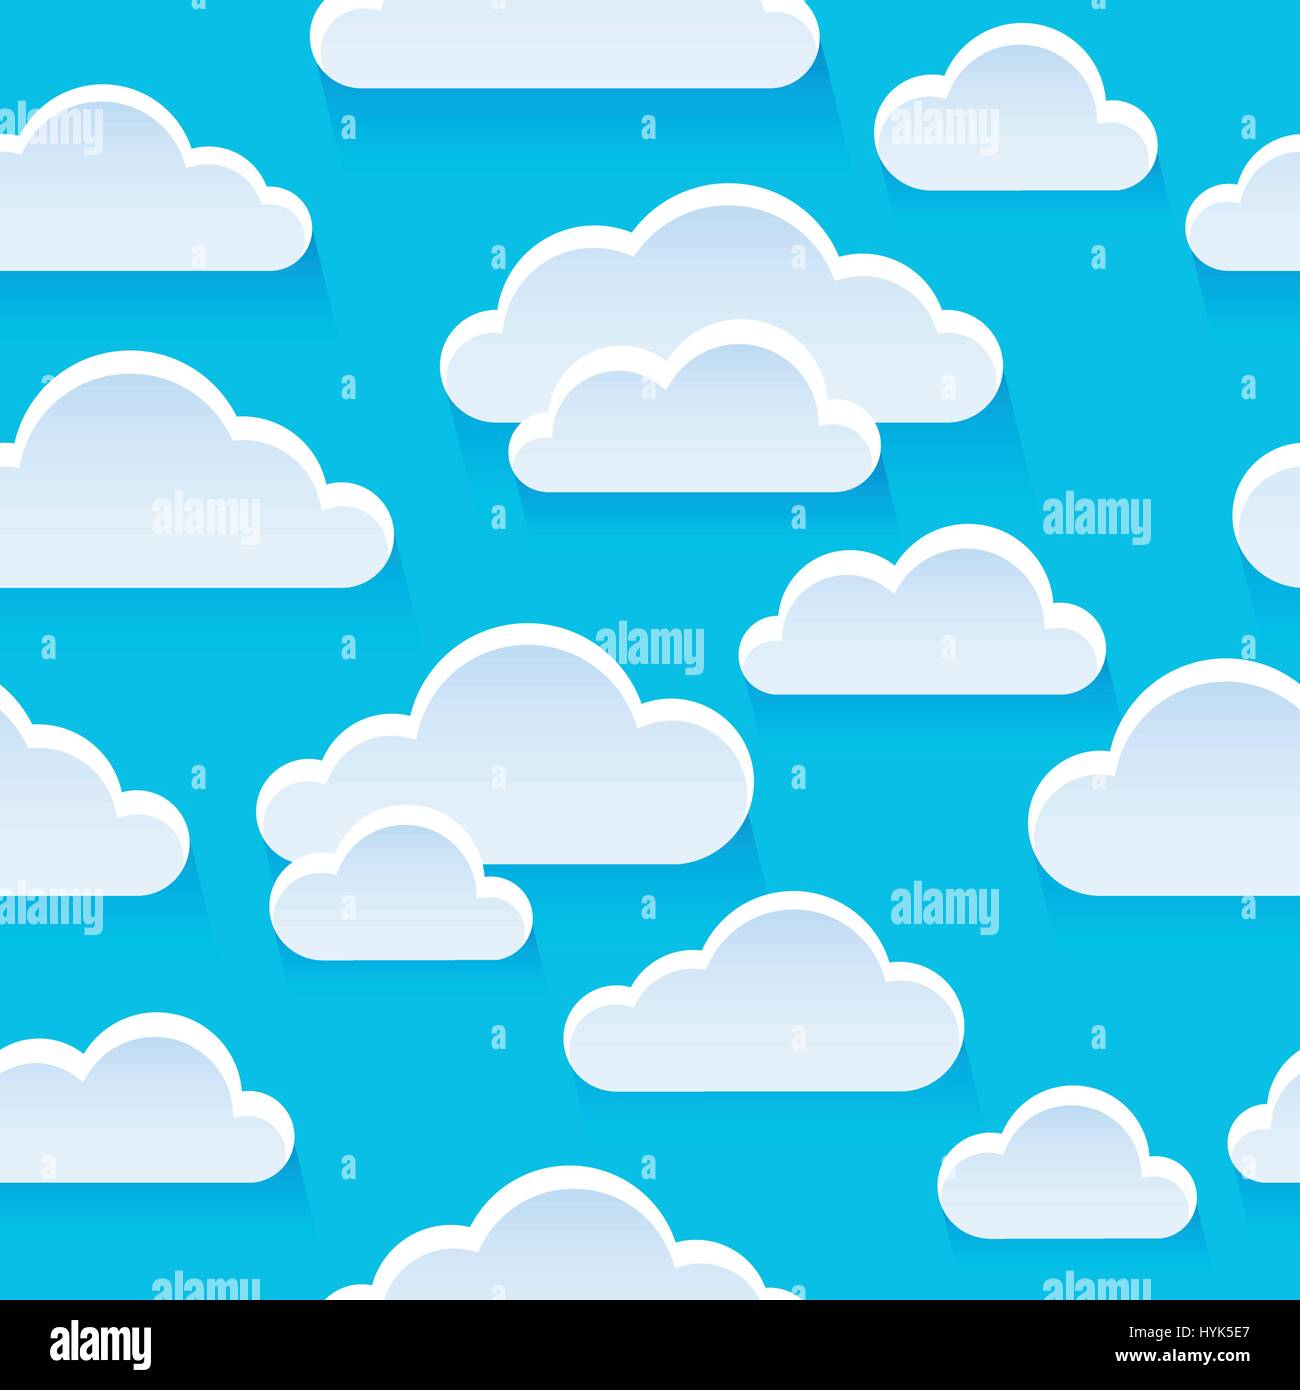 Stylized clouds seamless background 1 - eps10 vector illustration. Stock Vector